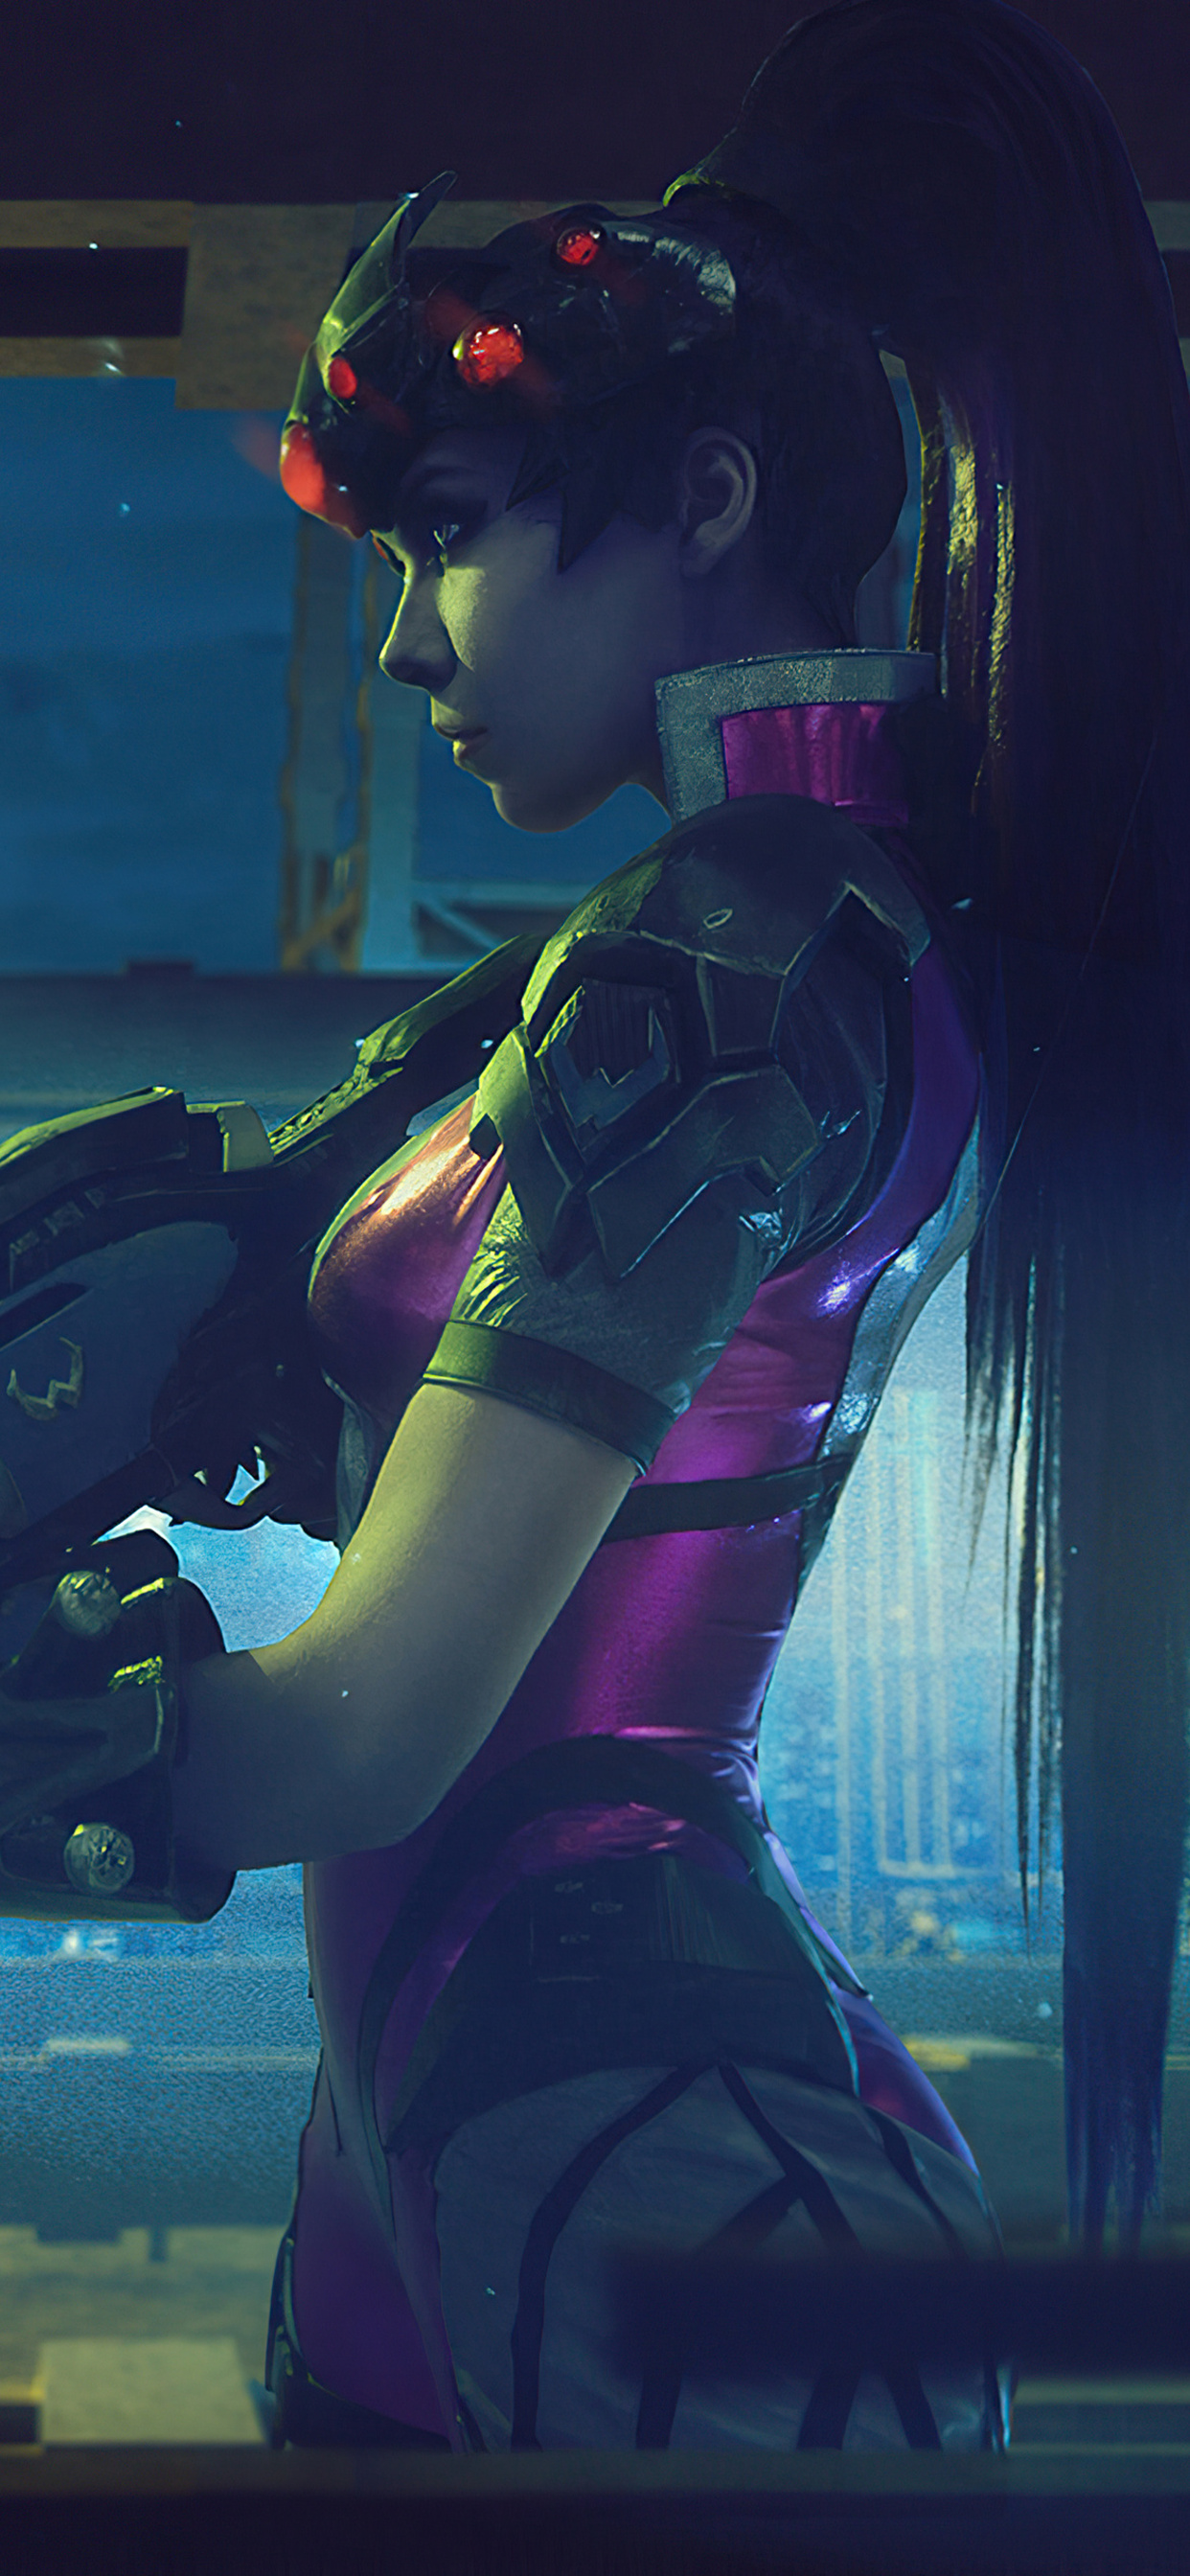 1242x26 Widowmaker Overwatch Artwork 4k Iphone Xs Max Hd 4k Wallpapers Images Backgrounds Photos And Pictures